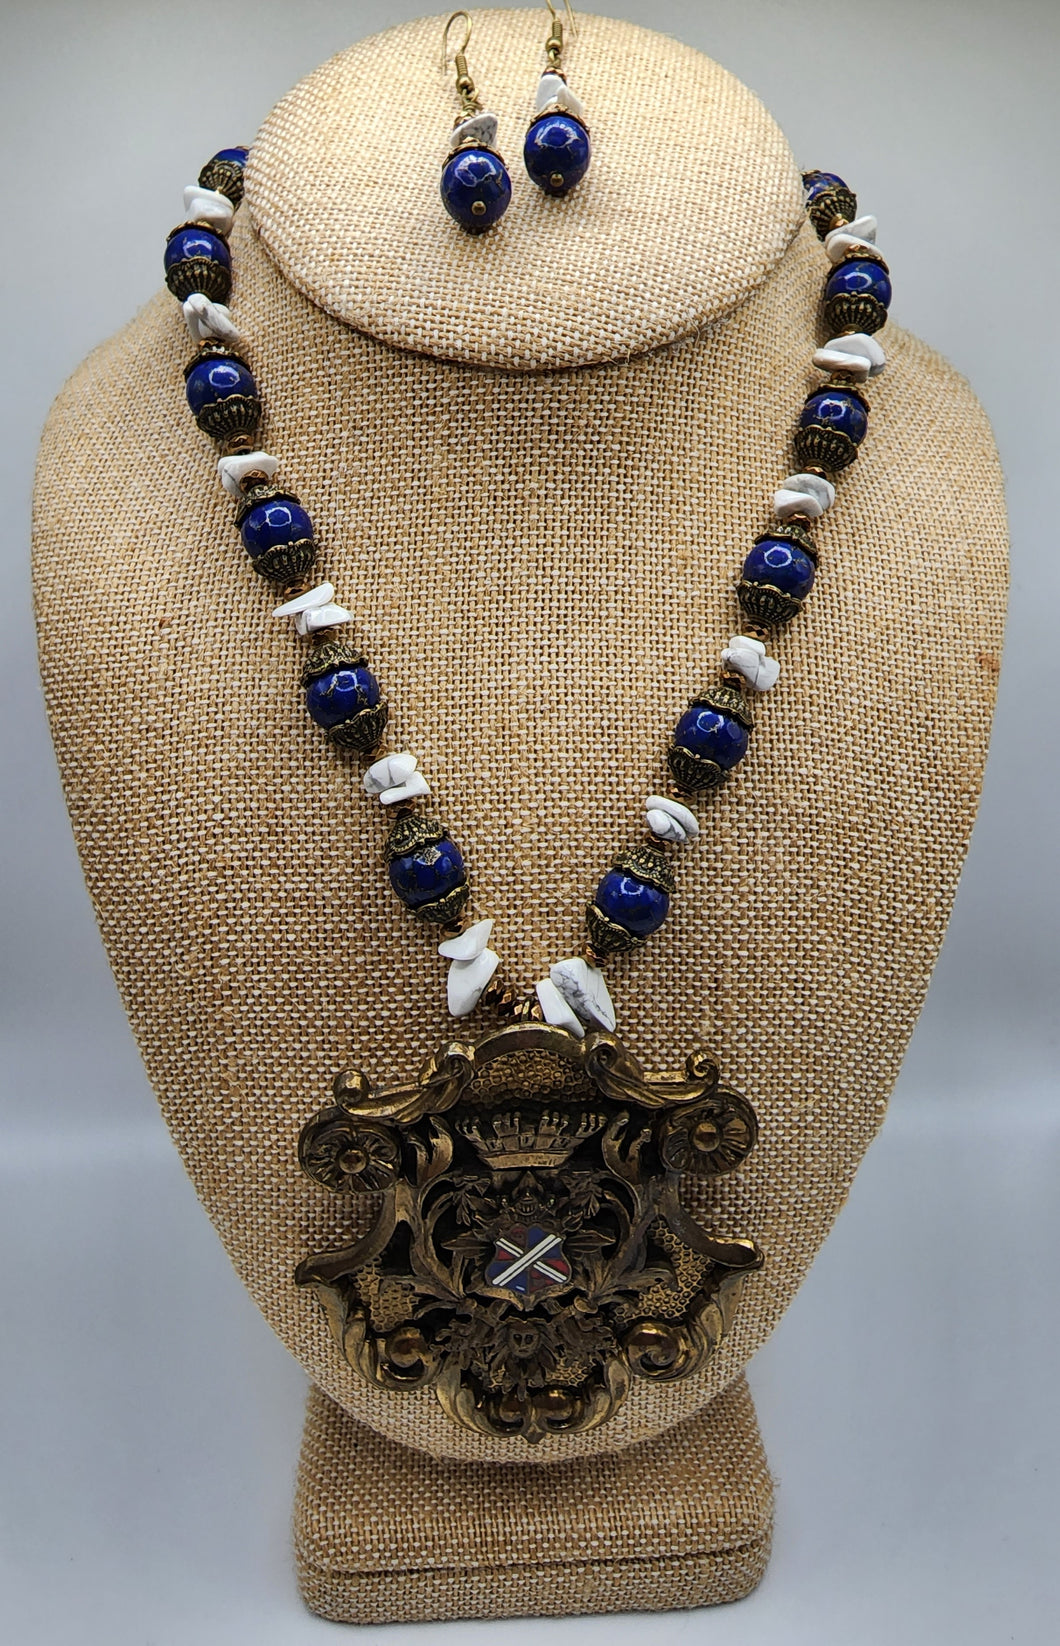 Vintage Lapis and Howlite Gemstone Braided Necklace and Earring Set With Coat of Arms Pendant - Trimmed in Antique Gold Findings With Bronze Colored Crystal Accents